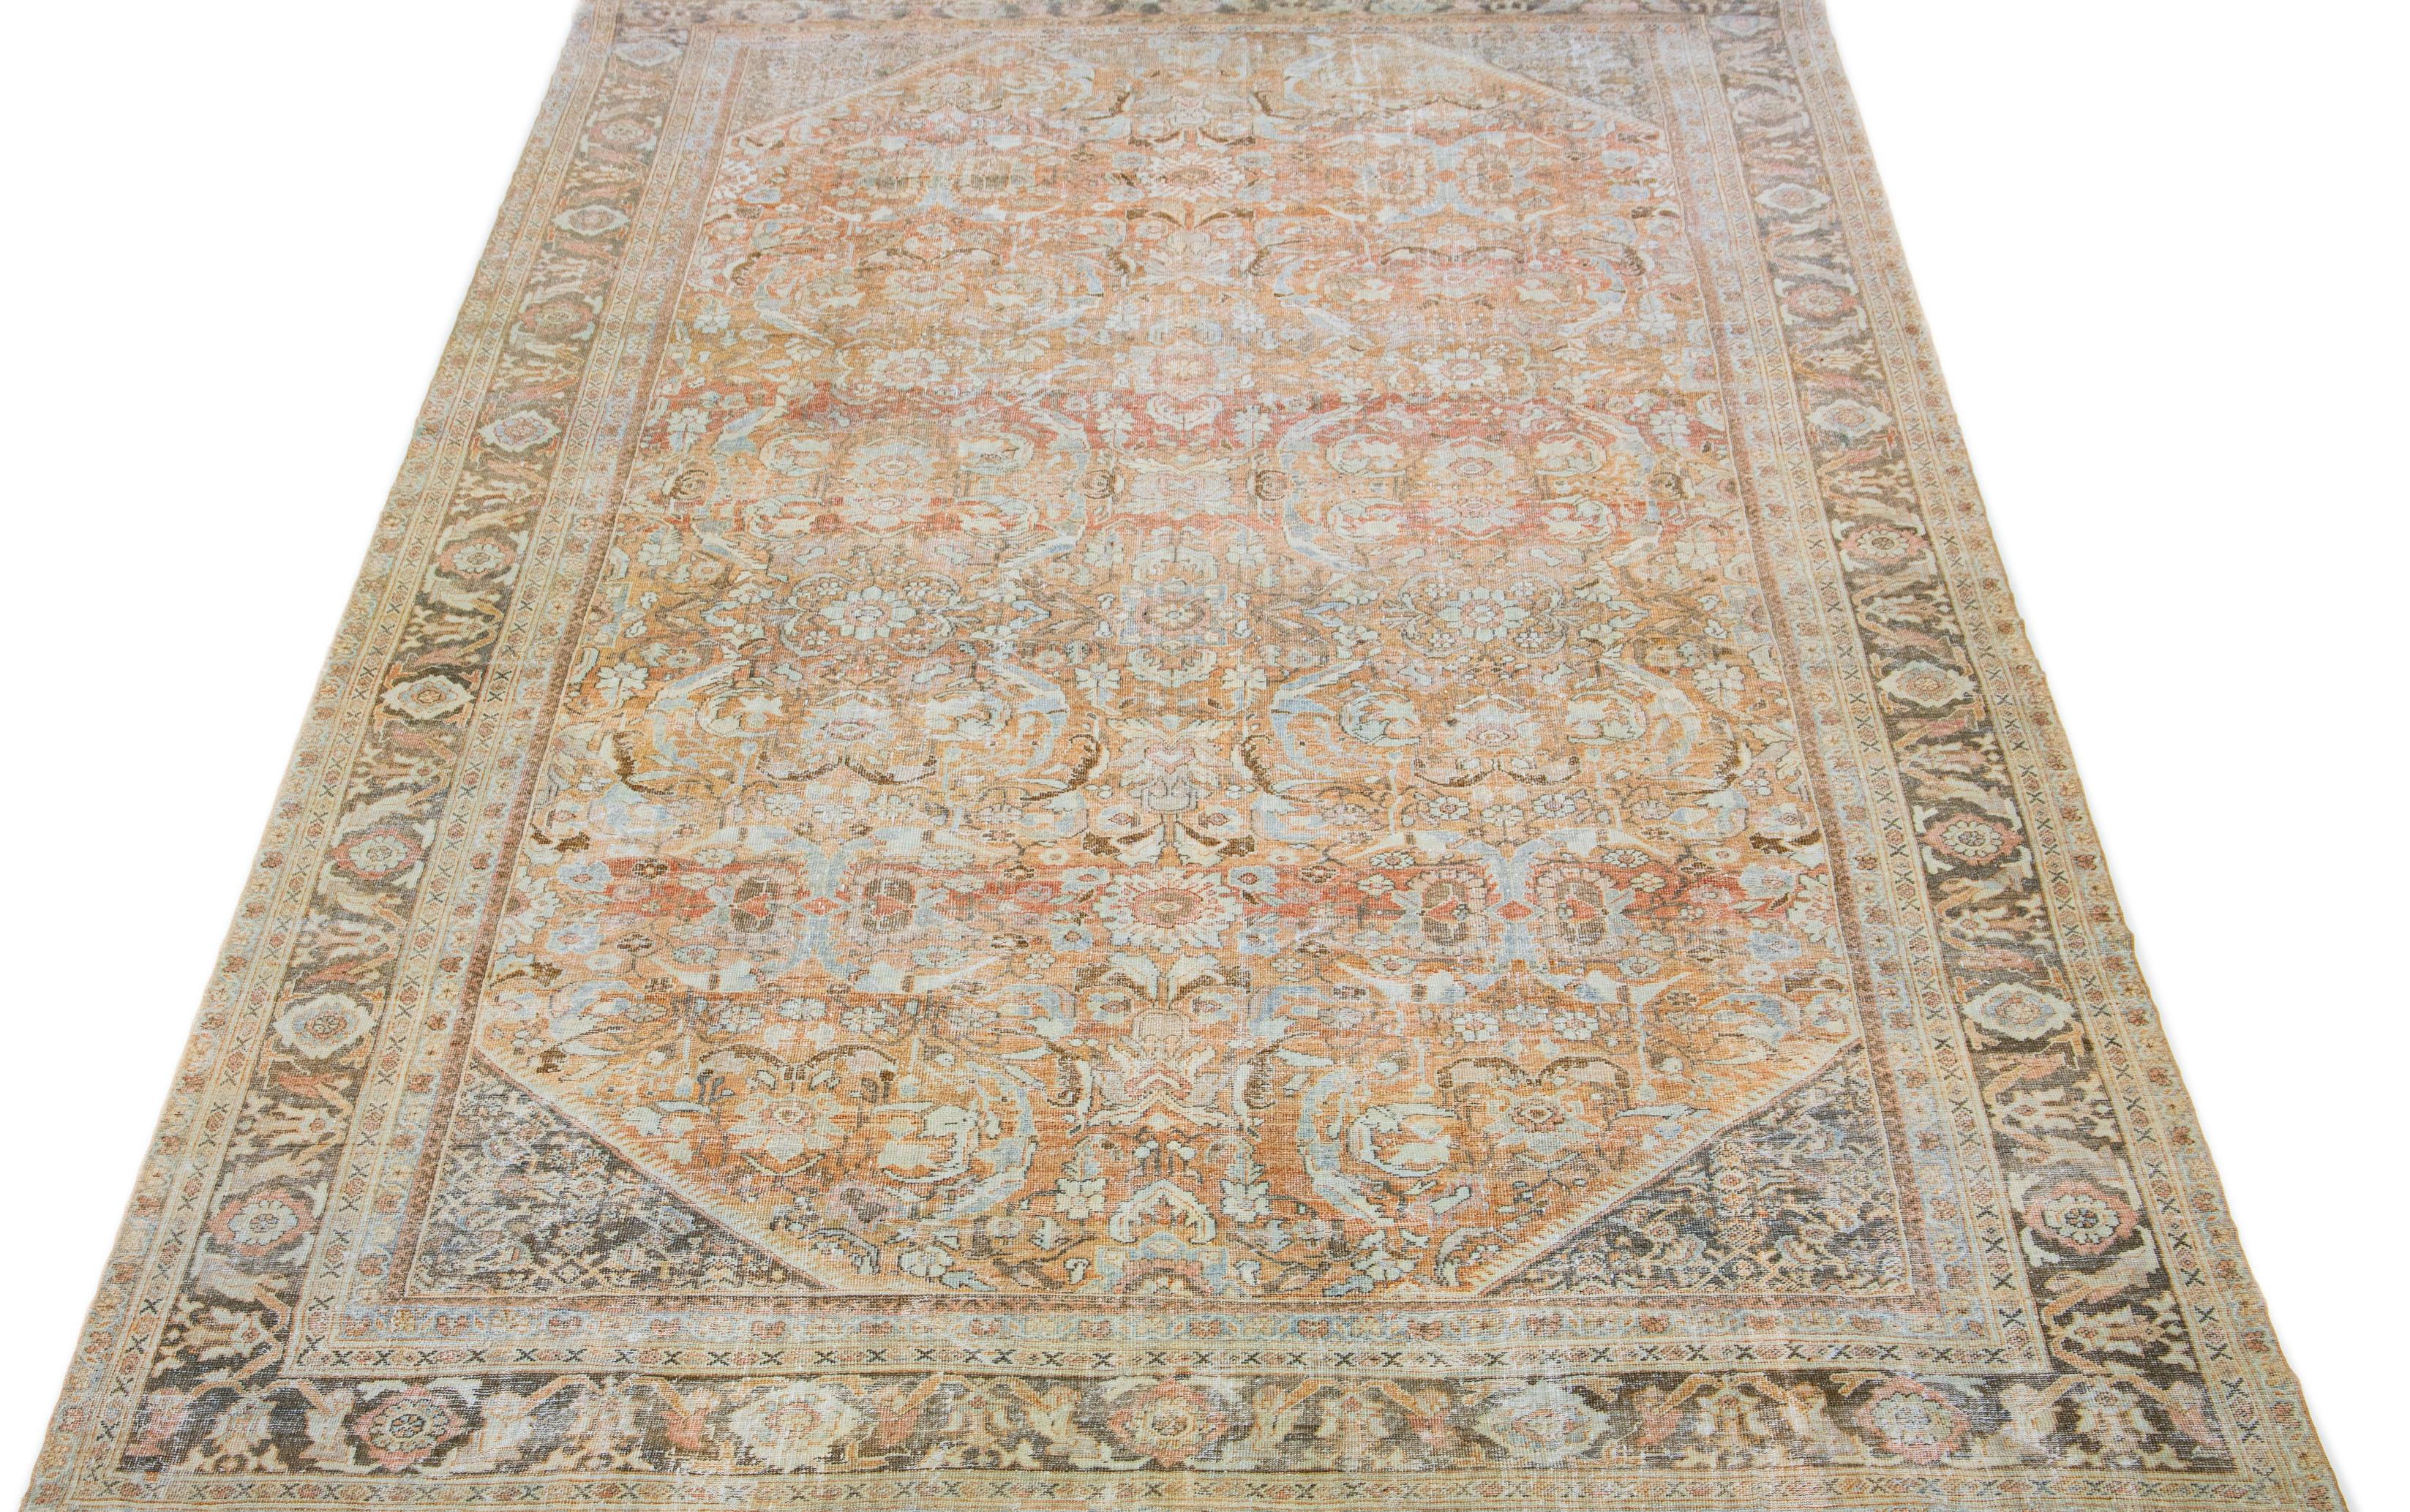 This hand-knotted mahal wool rug from the 1920s showcases a main orange/rust field, complemented by blue, peach, and brown hues in a traditional Allover floral motif.

This rug measures 10'2 x 17'.